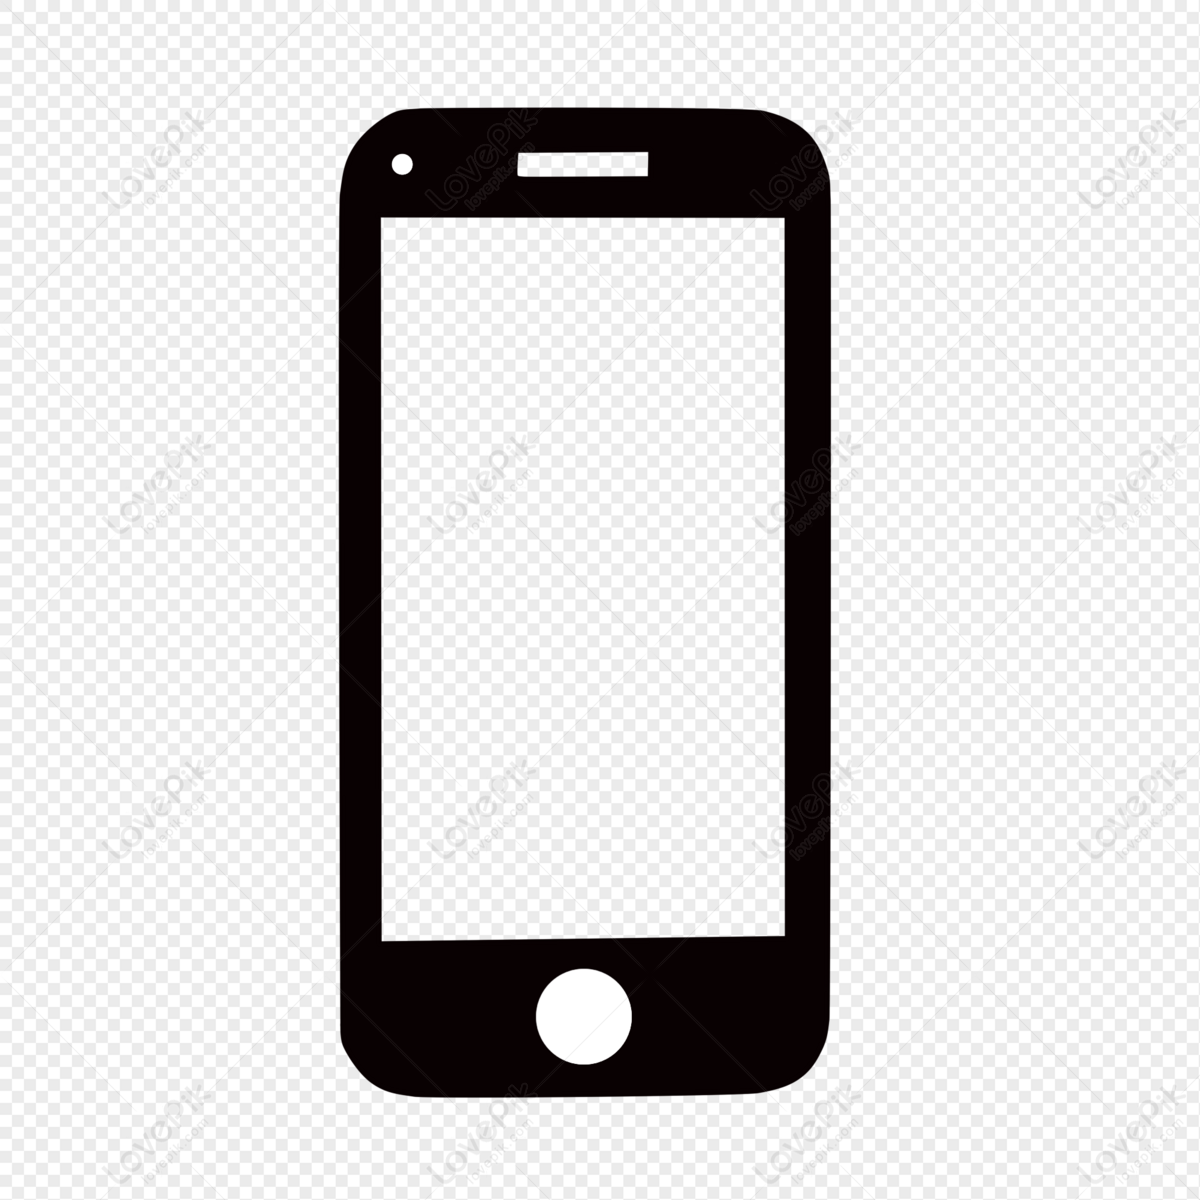 Mobile Phone Icon PNG Images With Transparent Background | Free ...